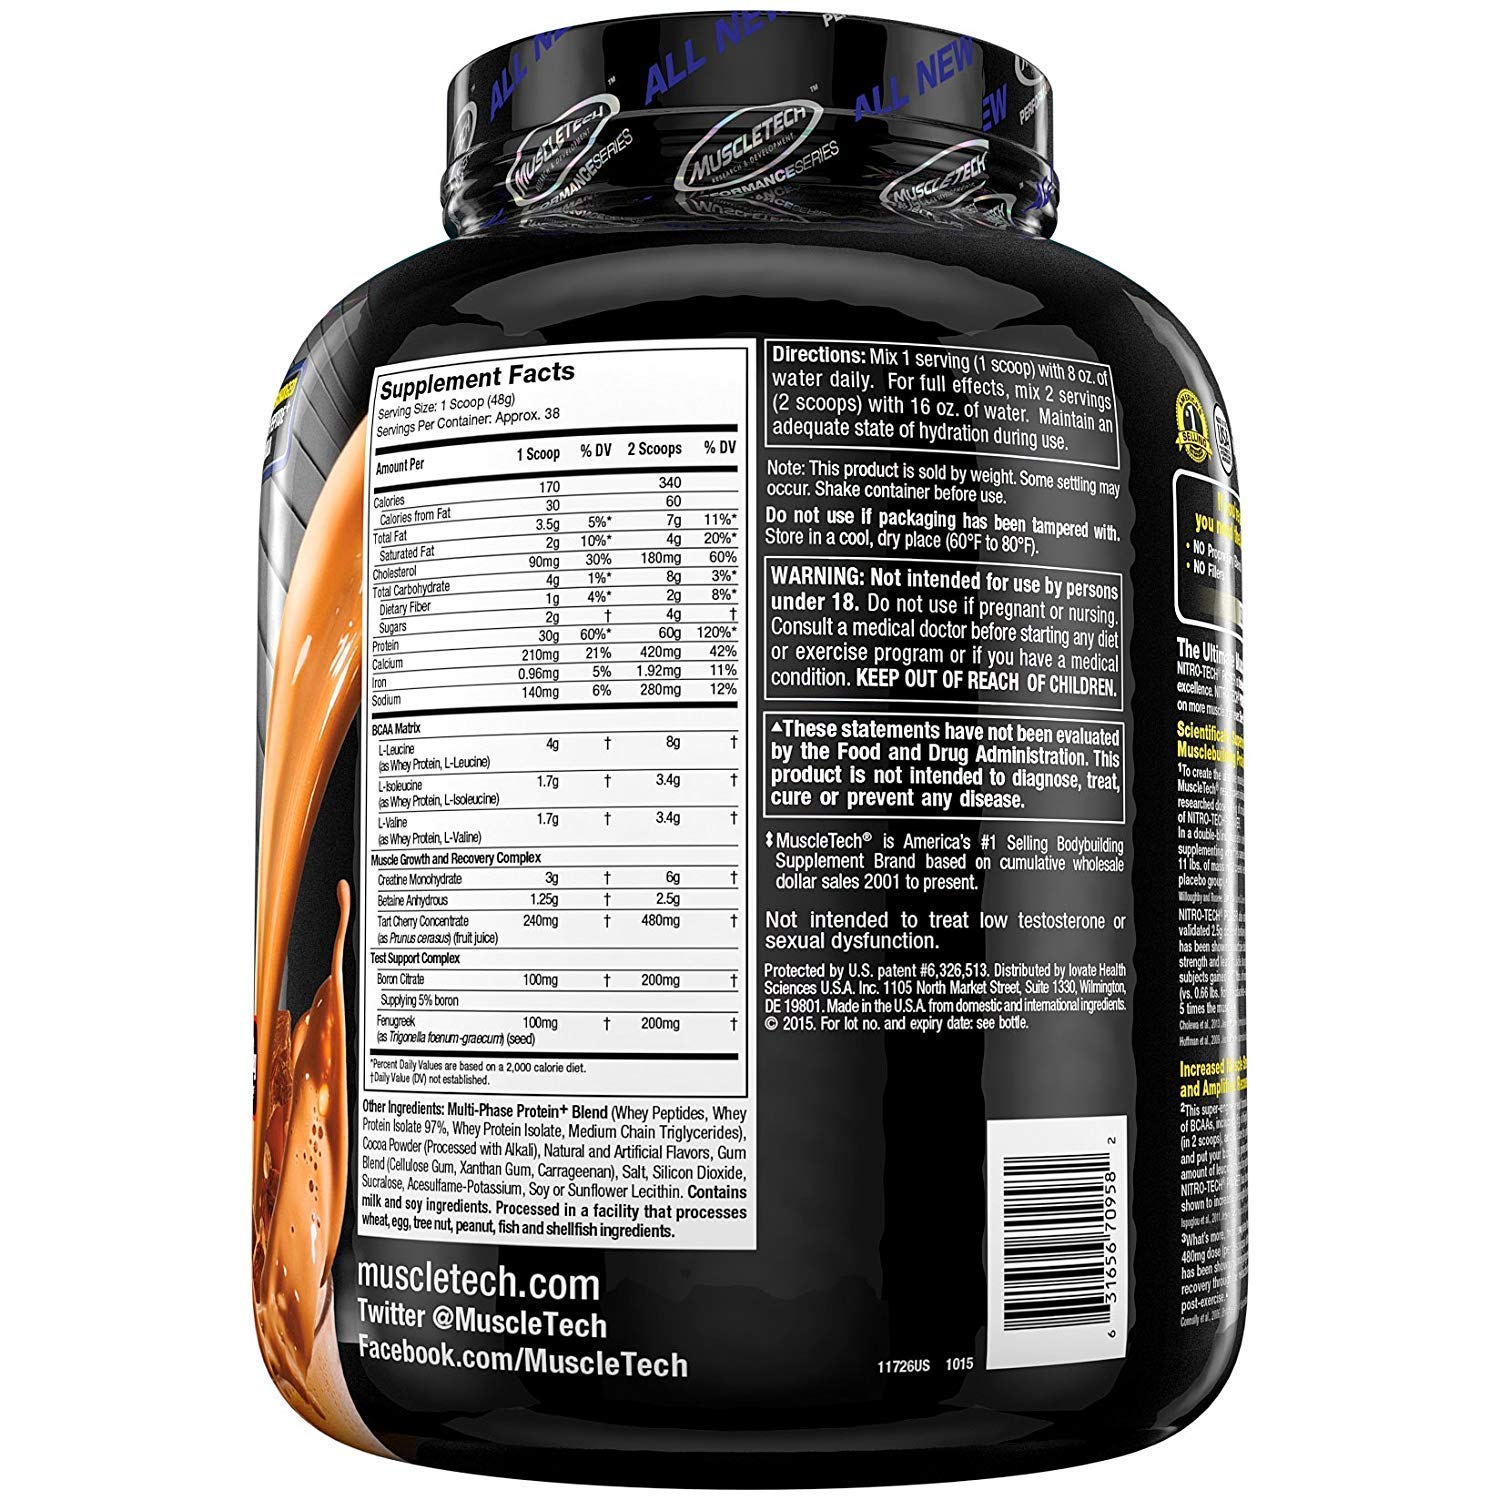 Image Of Muscletech Performance Series Nitrotech Power-Chocolate(4Lb) Beast Nutrition